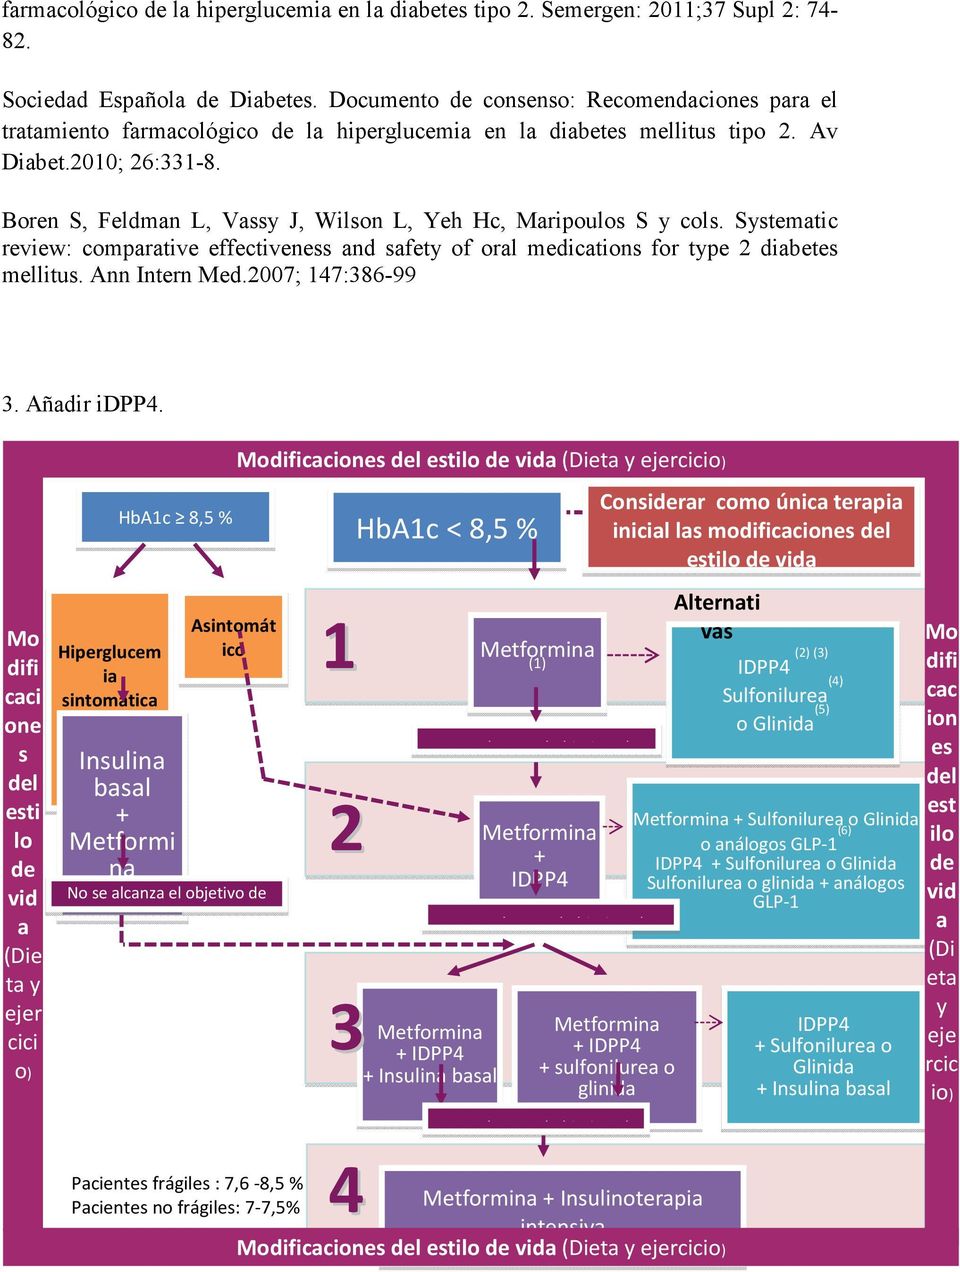 Boren S, Feldmn L, Vssy J, Wilson L, Yeh Hc, Mripoulos S y cols. Systemtic review: comprtive effectiveness nd sfety of orl medictions for type 2 dibetes mellitus. Ann Intern Med.2007; 147:386-99 3.